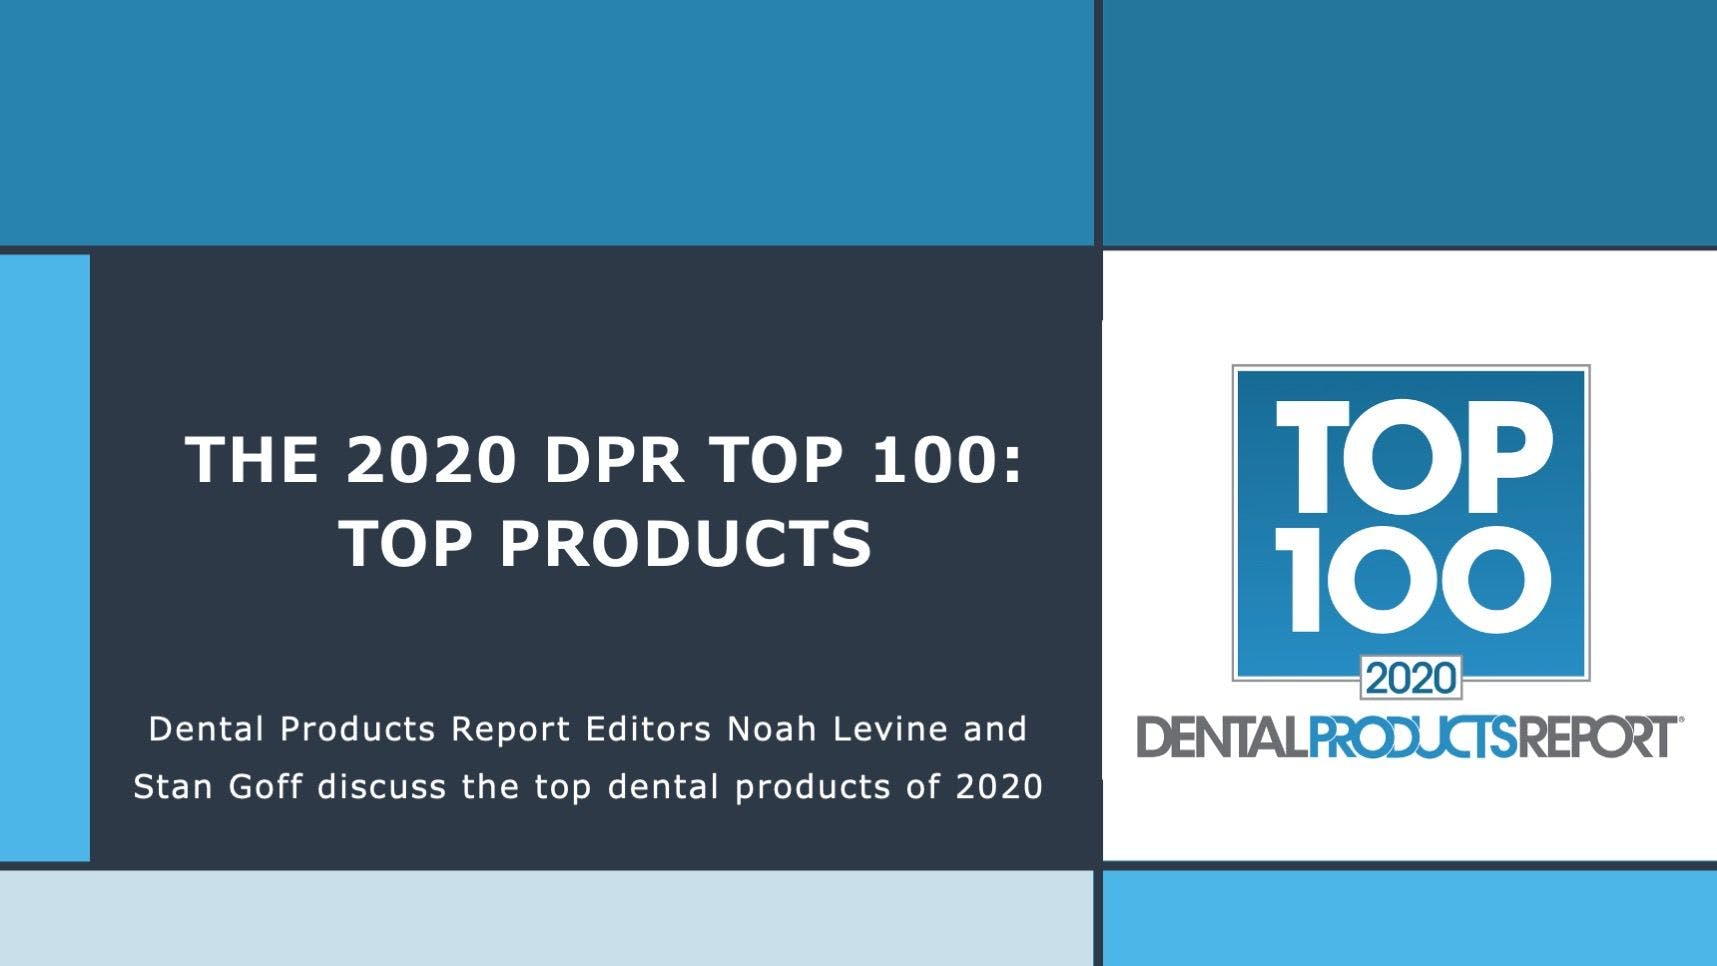 DPR Top 100 products 2020